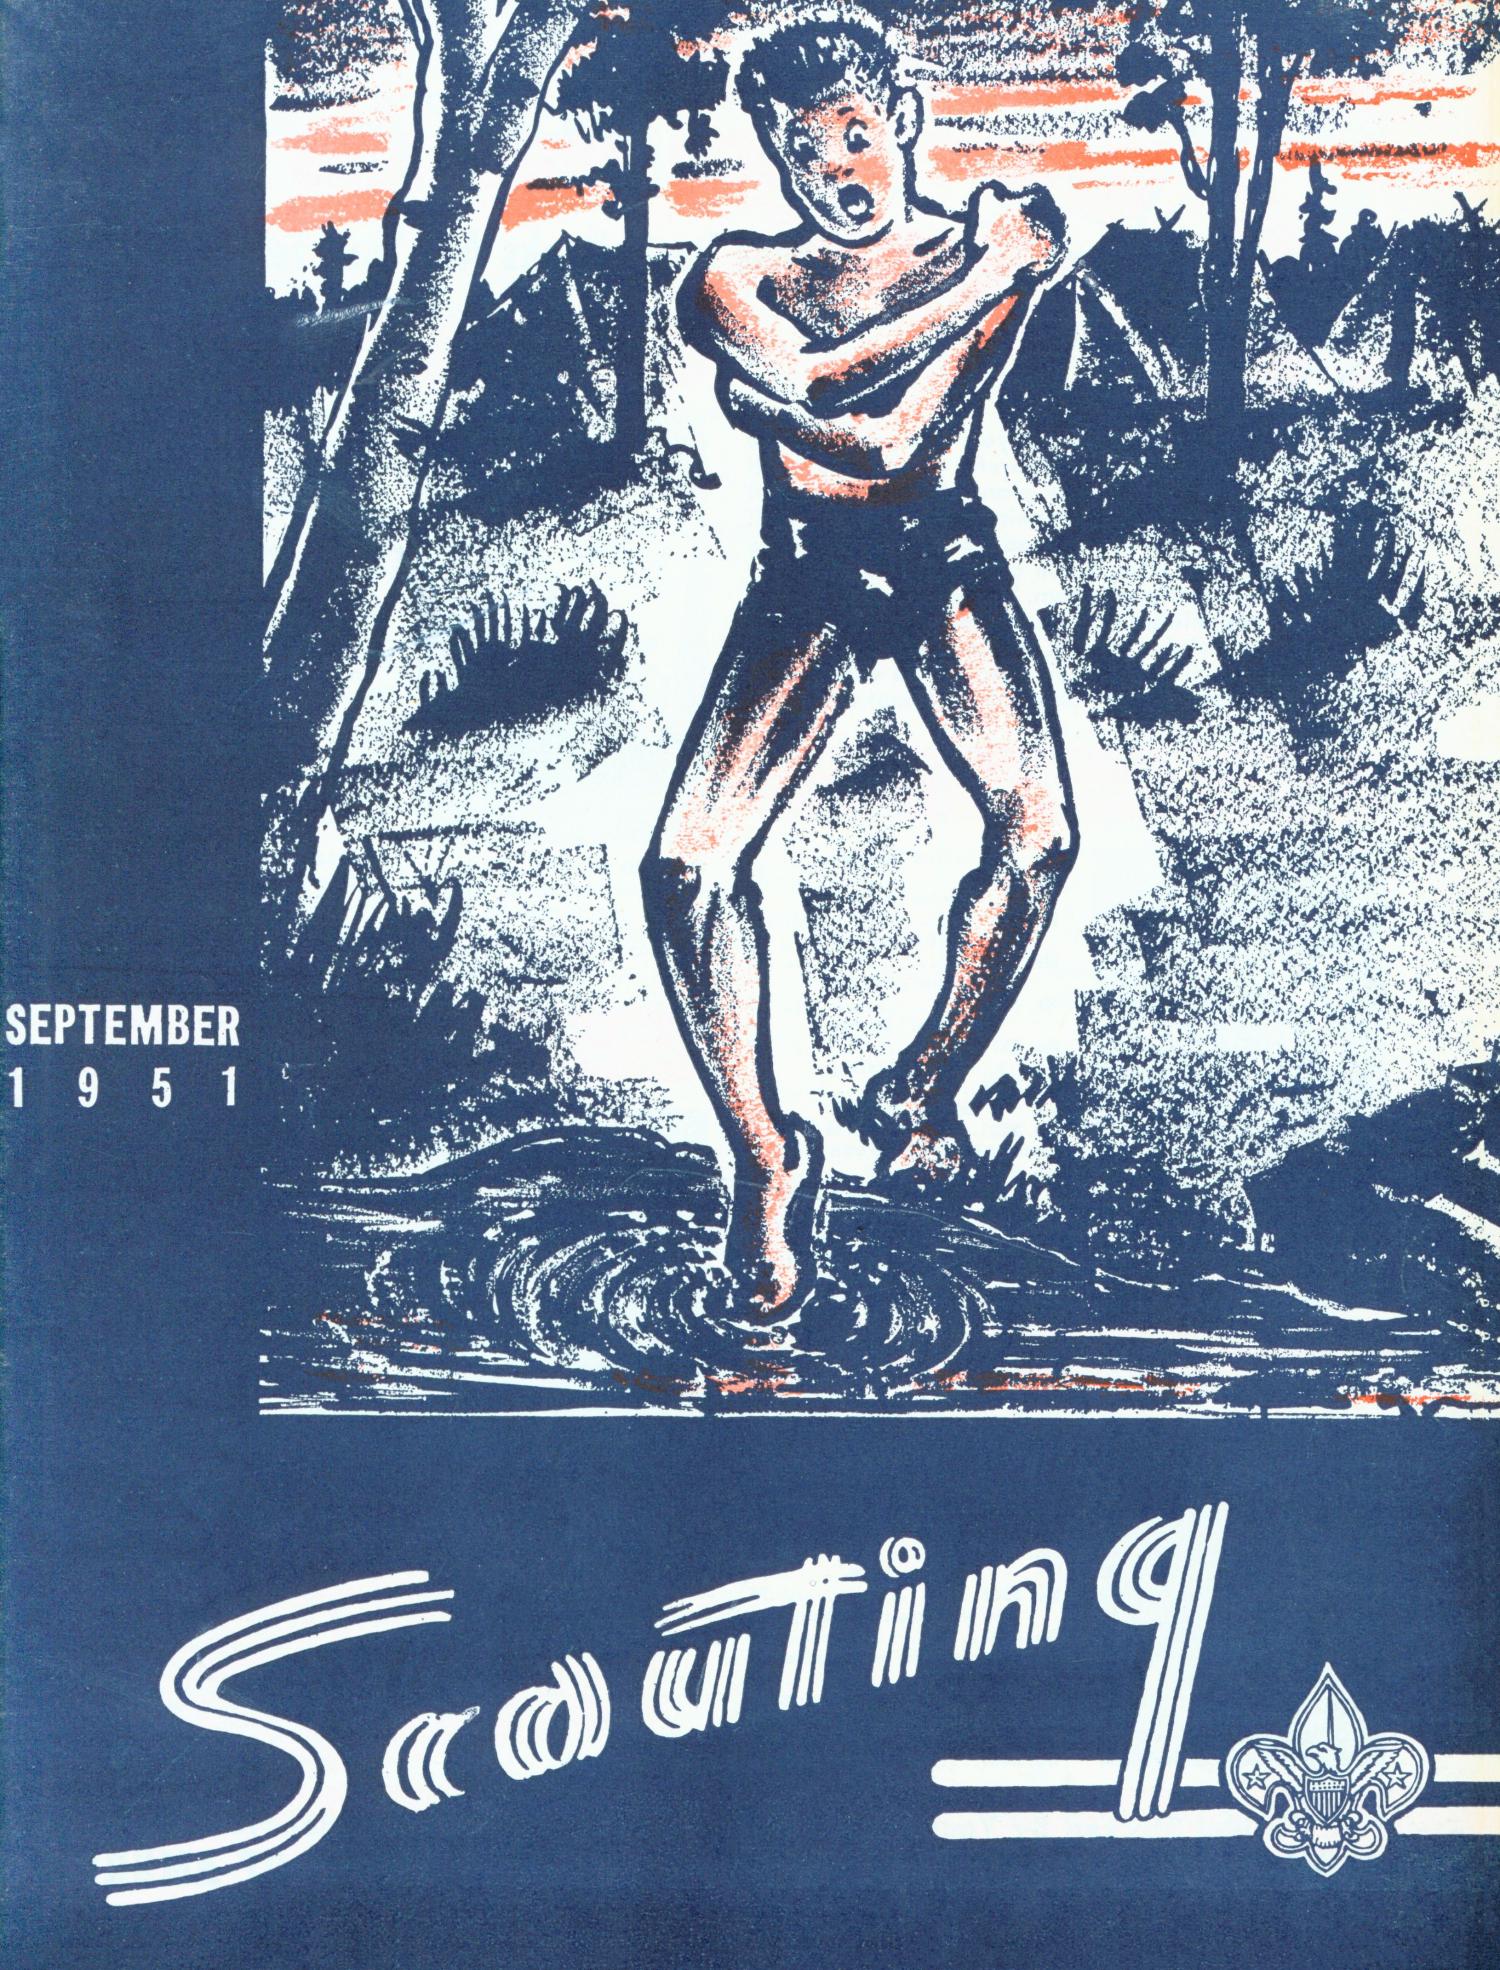 Scouting, Volume 39, Number 7, September 1951
                                                
                                                    Front Cover
                                                